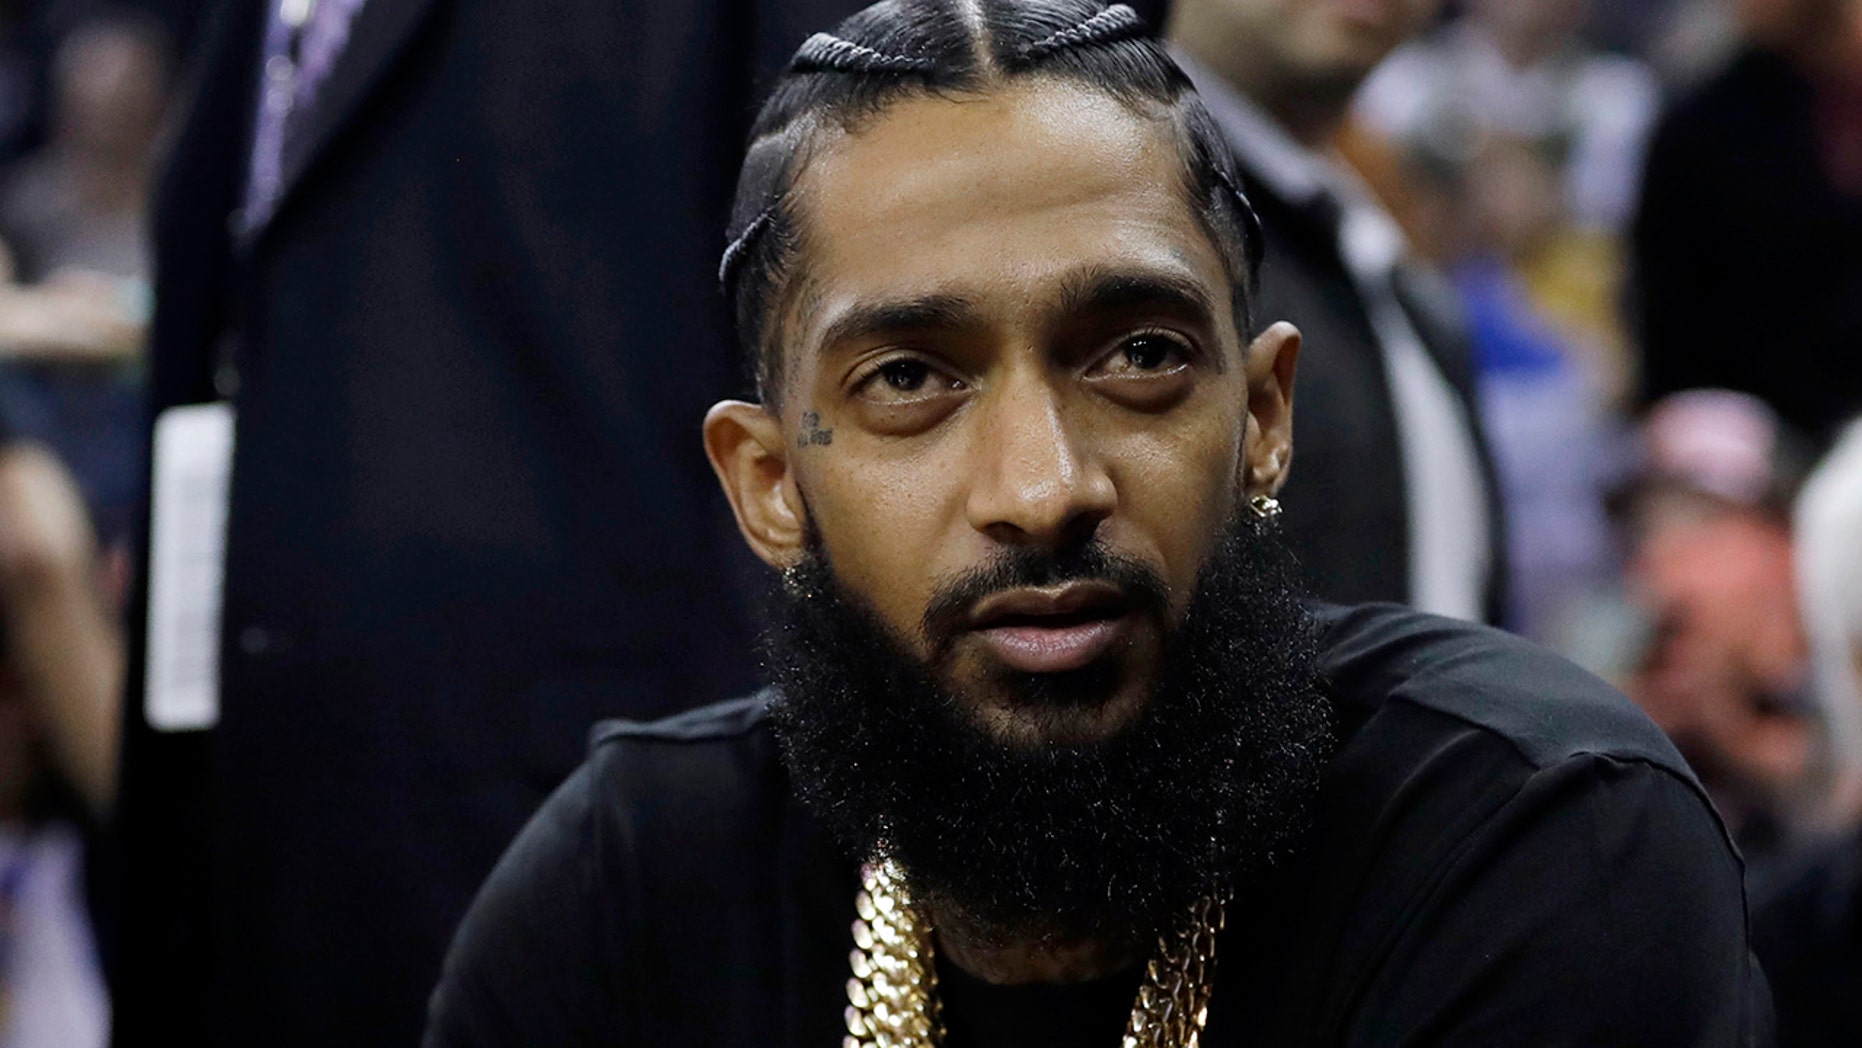 Nipsey Hussle died of gunshot wounds to the head and torso, coroner confirms | Fox News1862 x 1048